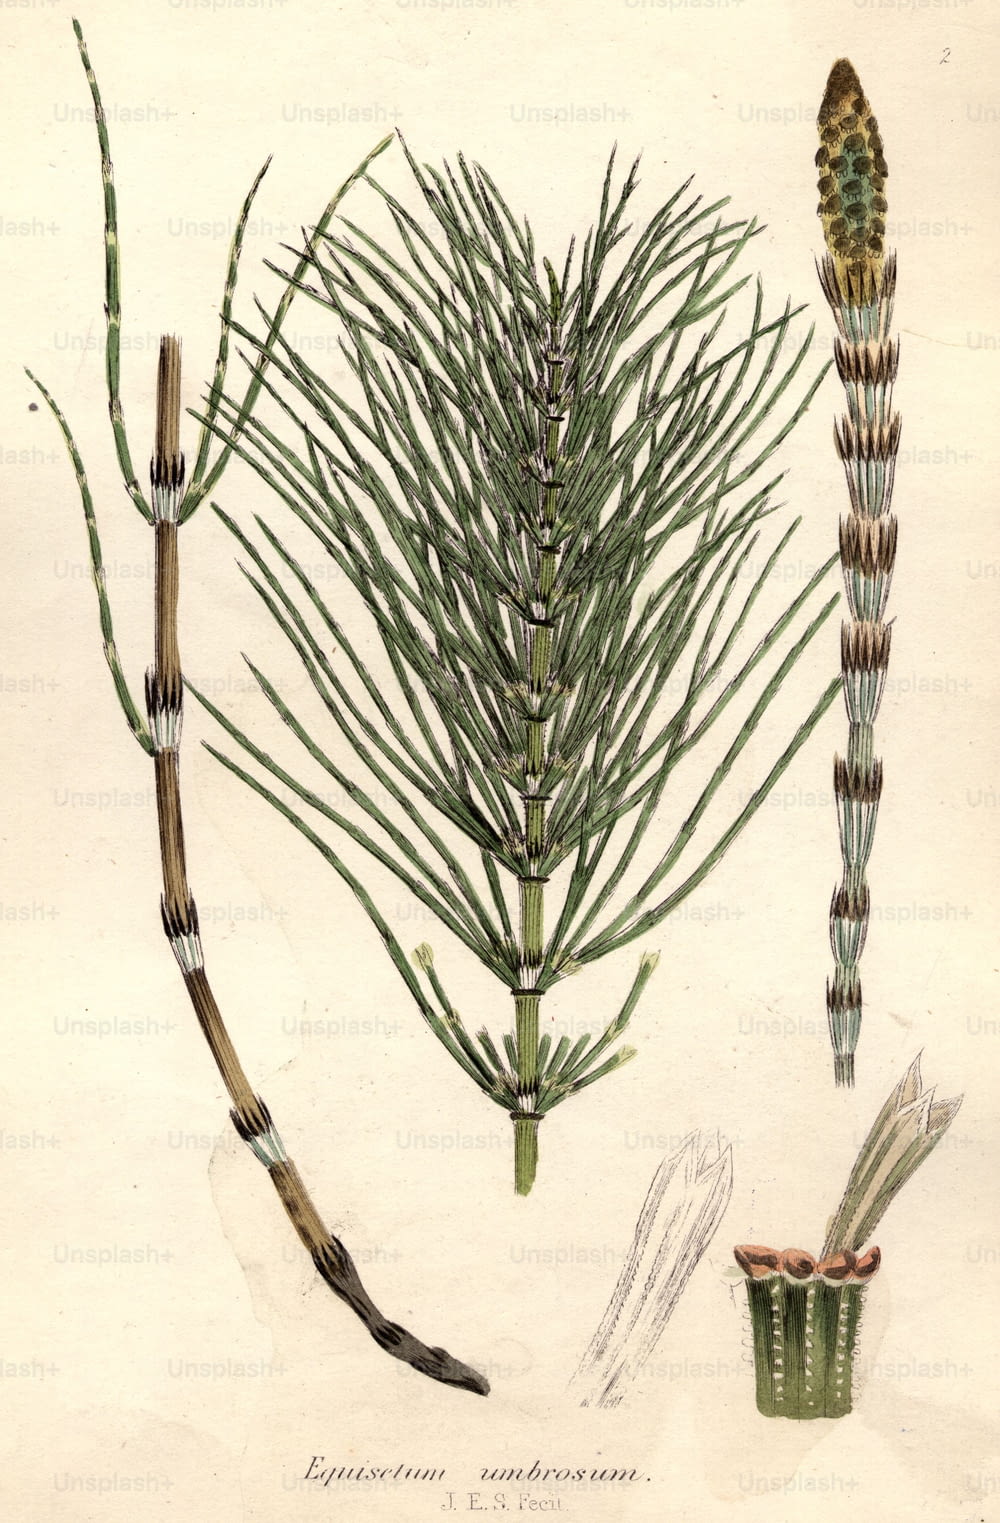 circa 1800:  Equisetum umbrosum, or horse tail fern.  (Photo by Hulton Archive/Getty Images)